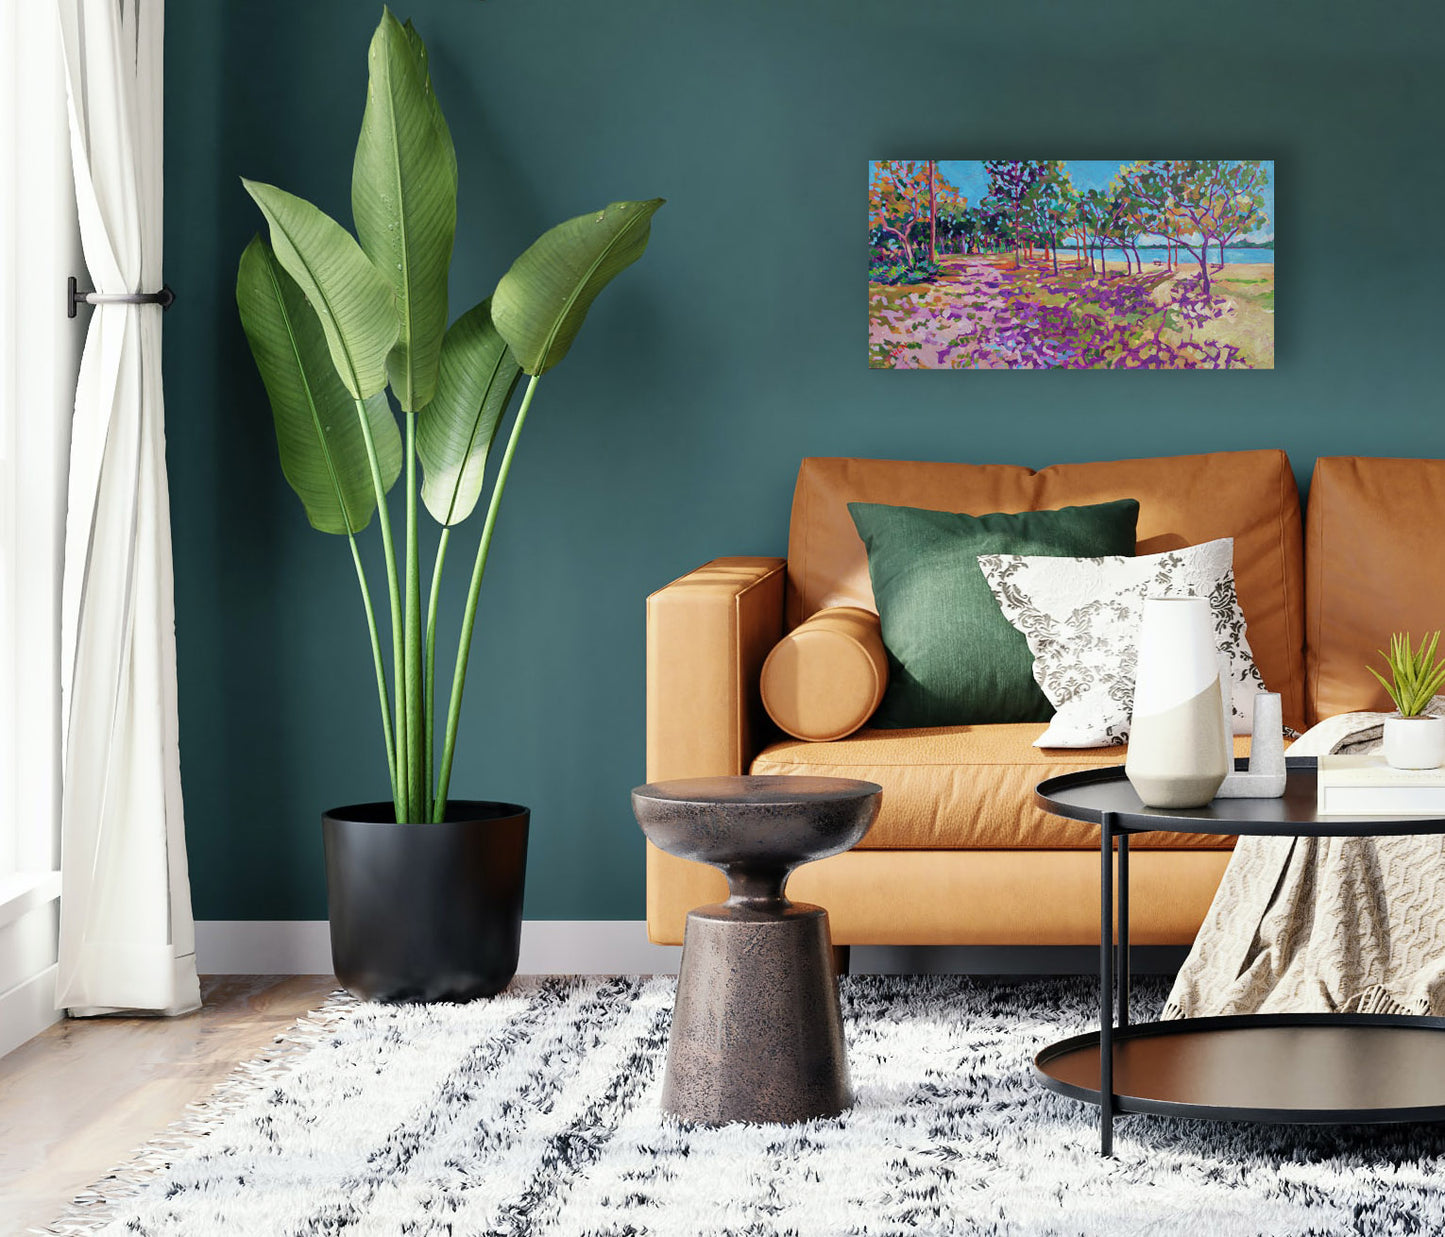 Painting of along the Anclote River in living room setting